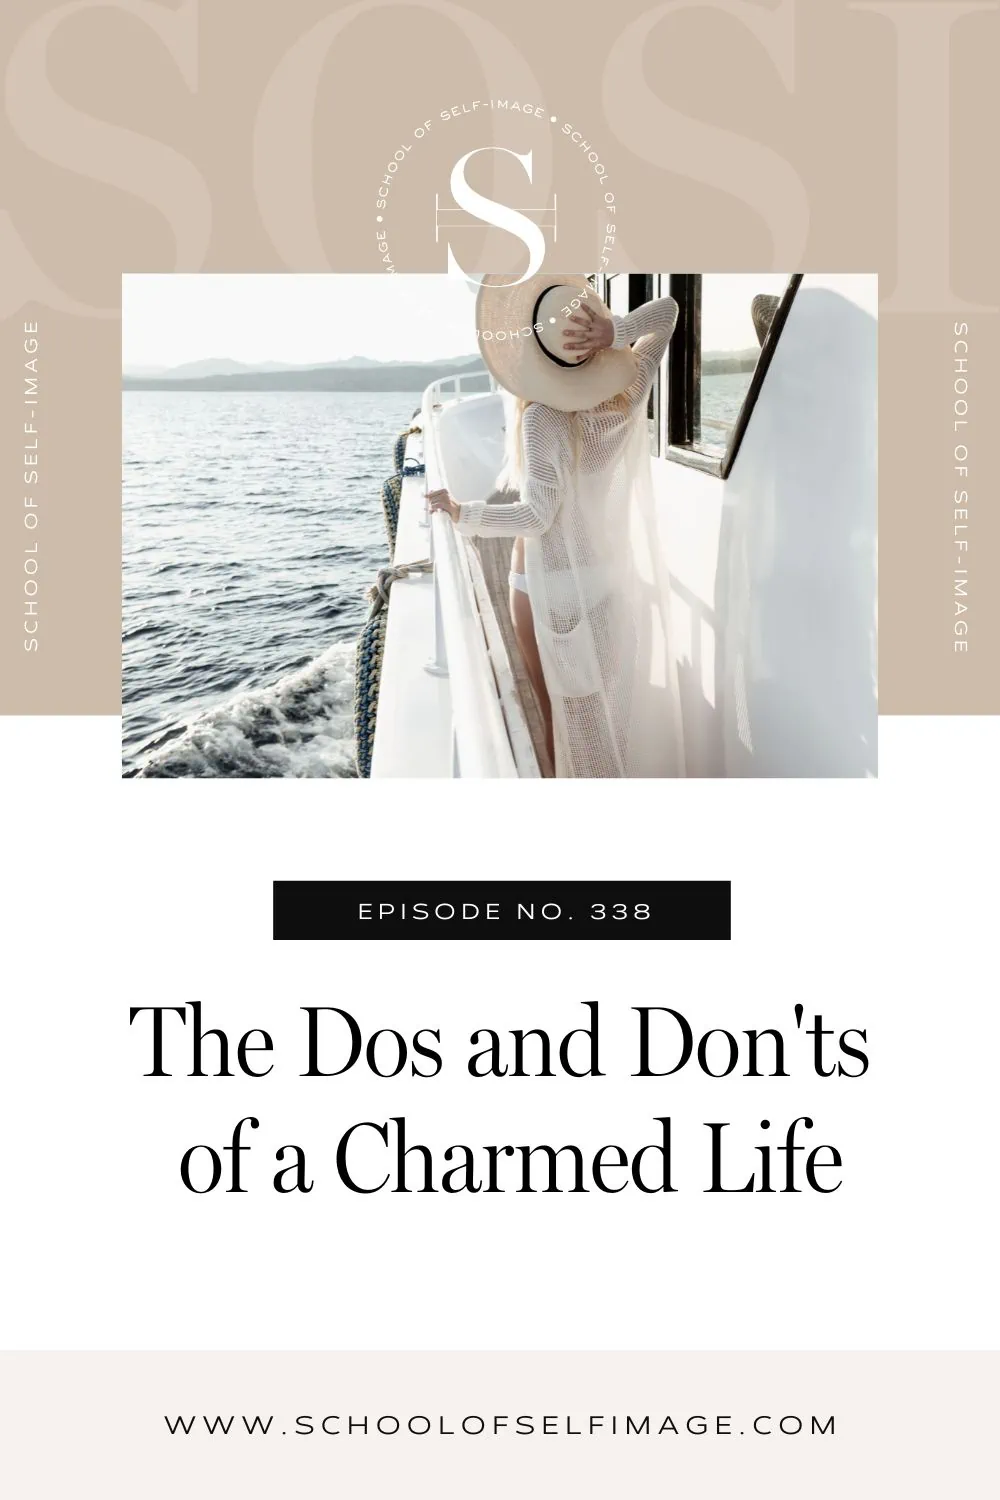 The Dos and Don'ts of a Charmed Life